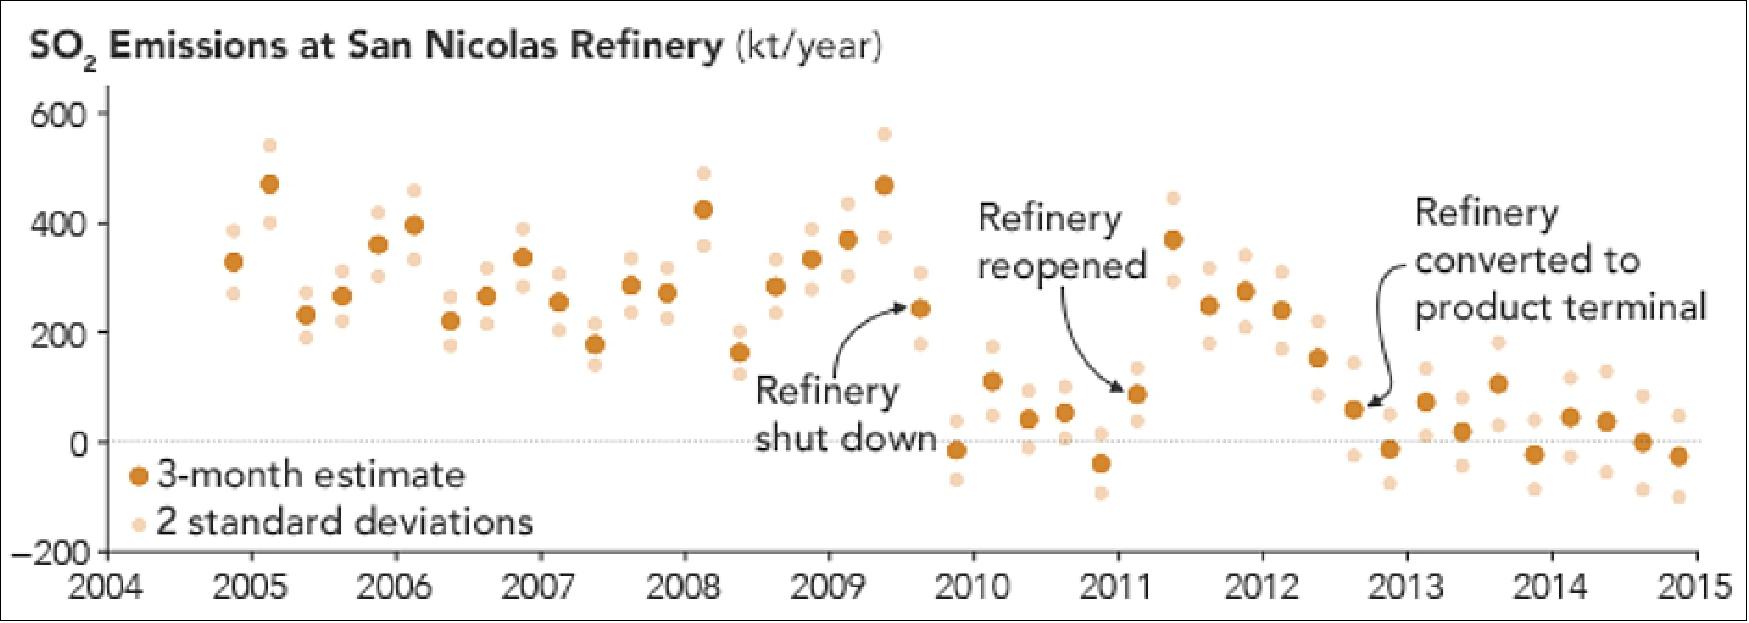 Figure 40: SO2 emission history at San Nicolas Refinery, Aruba, acquired by OMI in the timeframe 2004-2014 (image credit: NASA Earth Observatory, images by Joshua Stevens, using emissions data courtesy of Fioletov, Vitali E., et al. (2017))